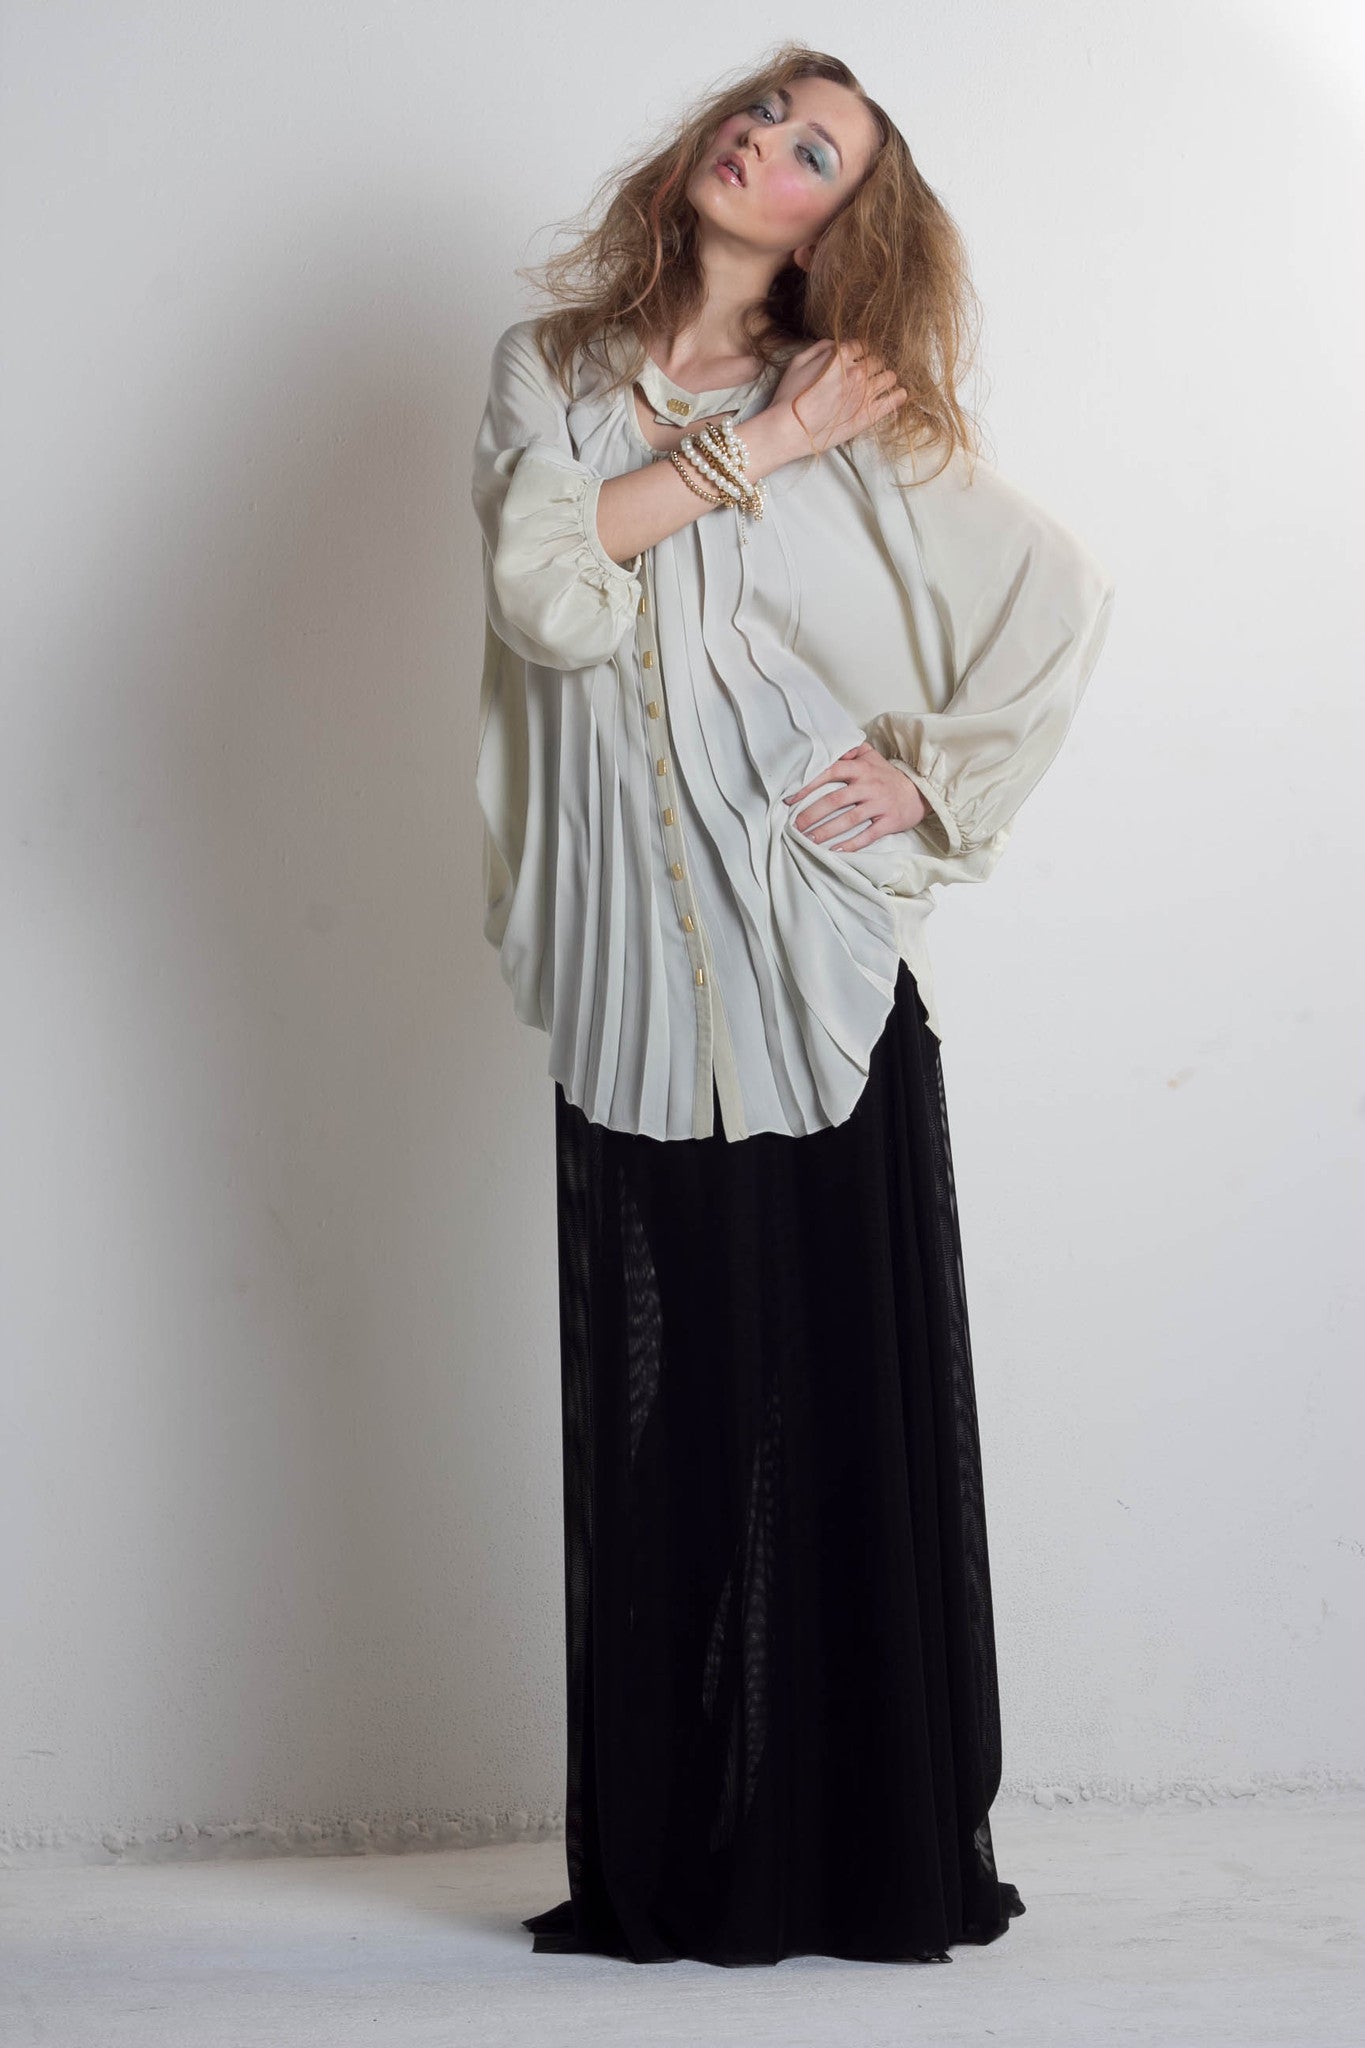 Off white, hand pleated, draped, silk, pretty, edgy flowing blouse